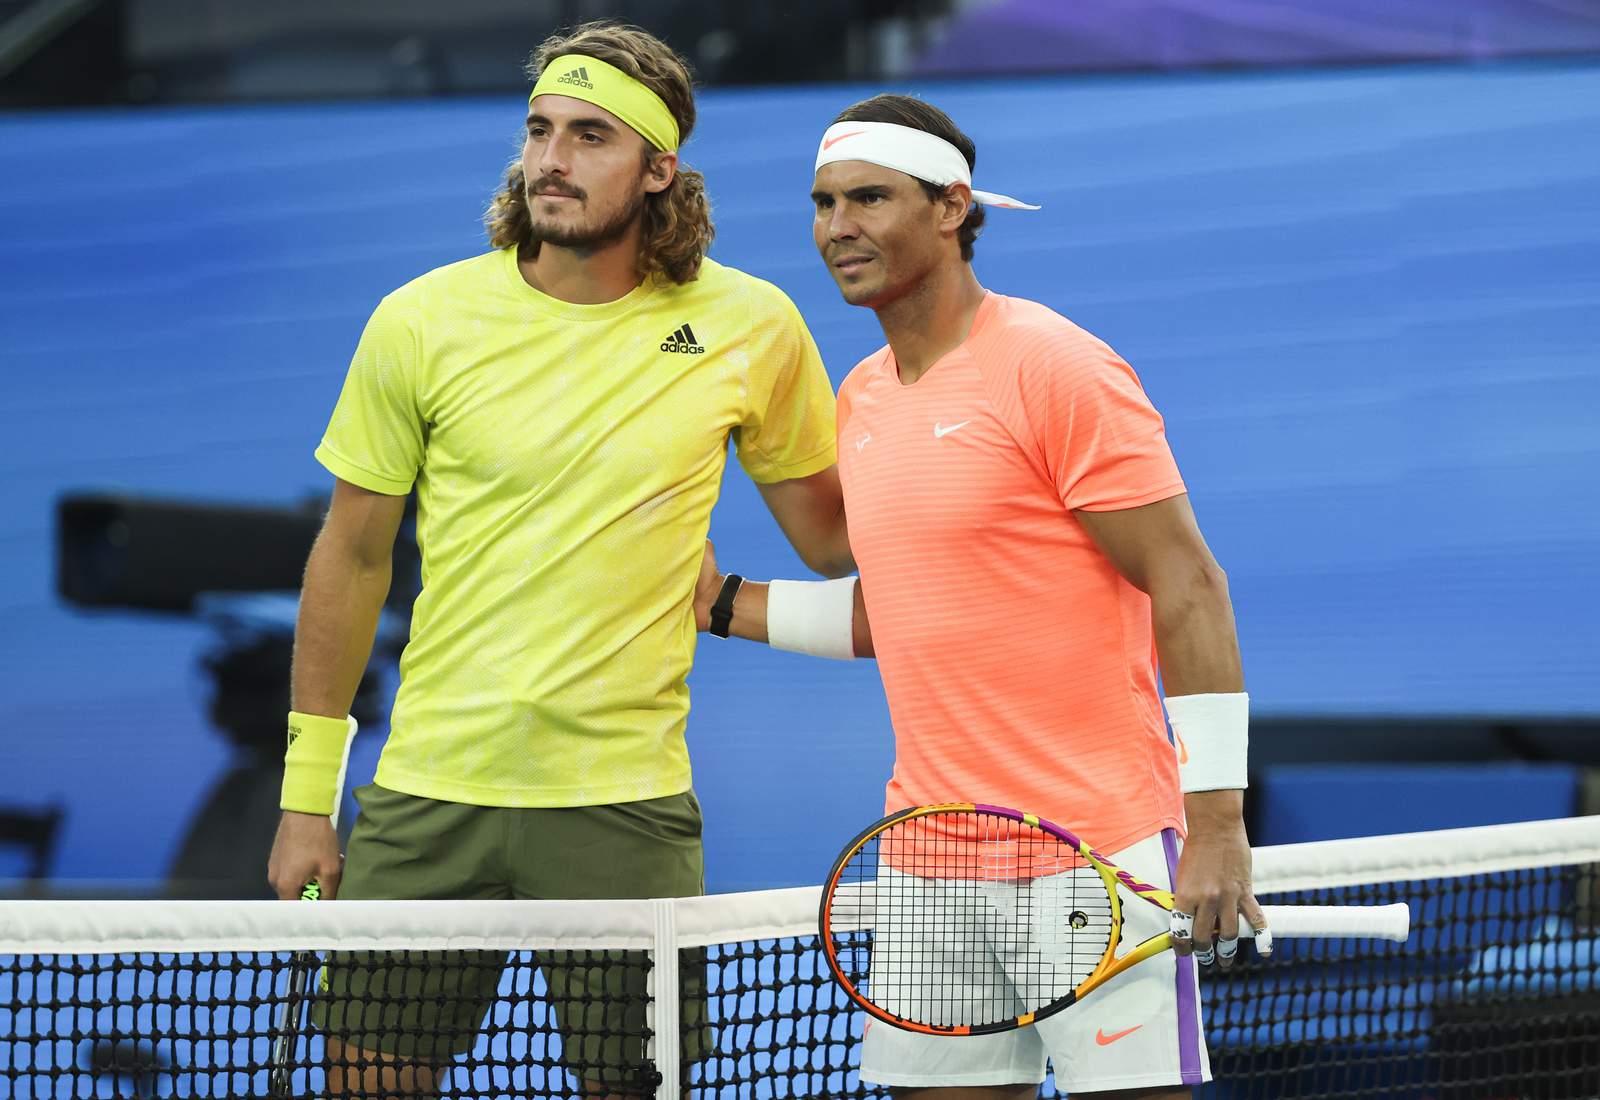 The Latest: Nadal loses to Tsitsipas in 5 at Australian Open